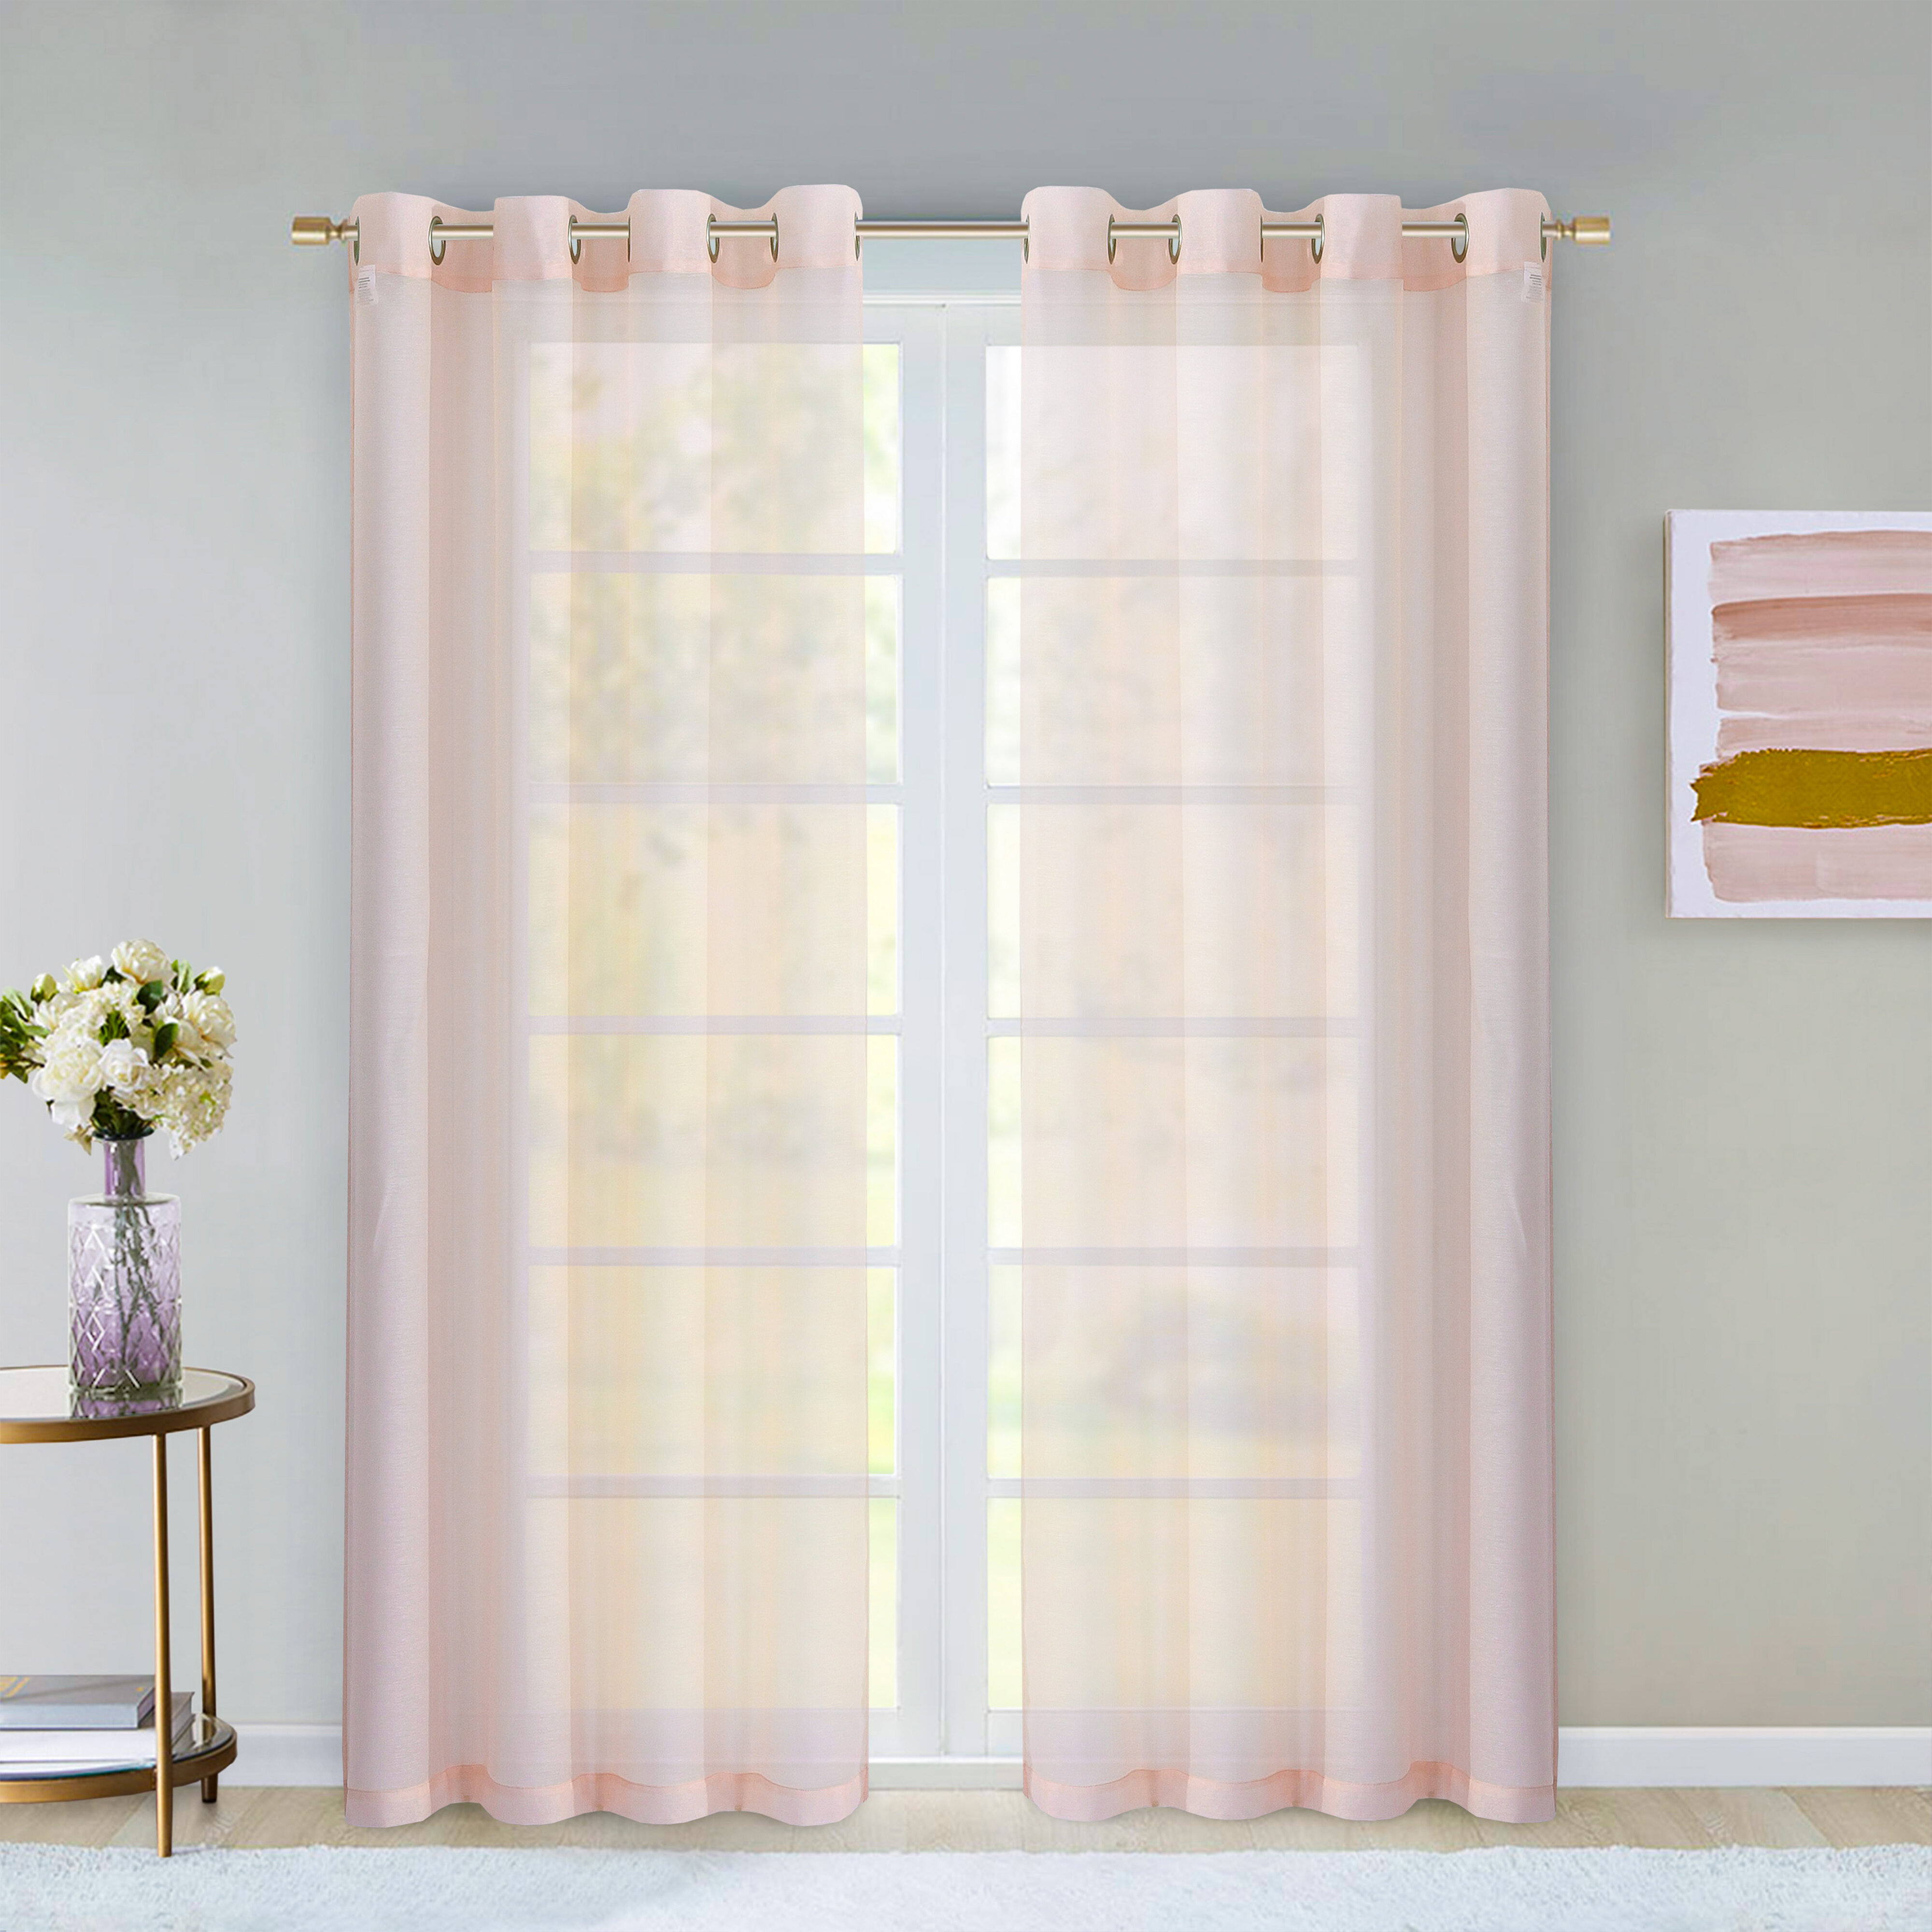 extra wide curtain fabric